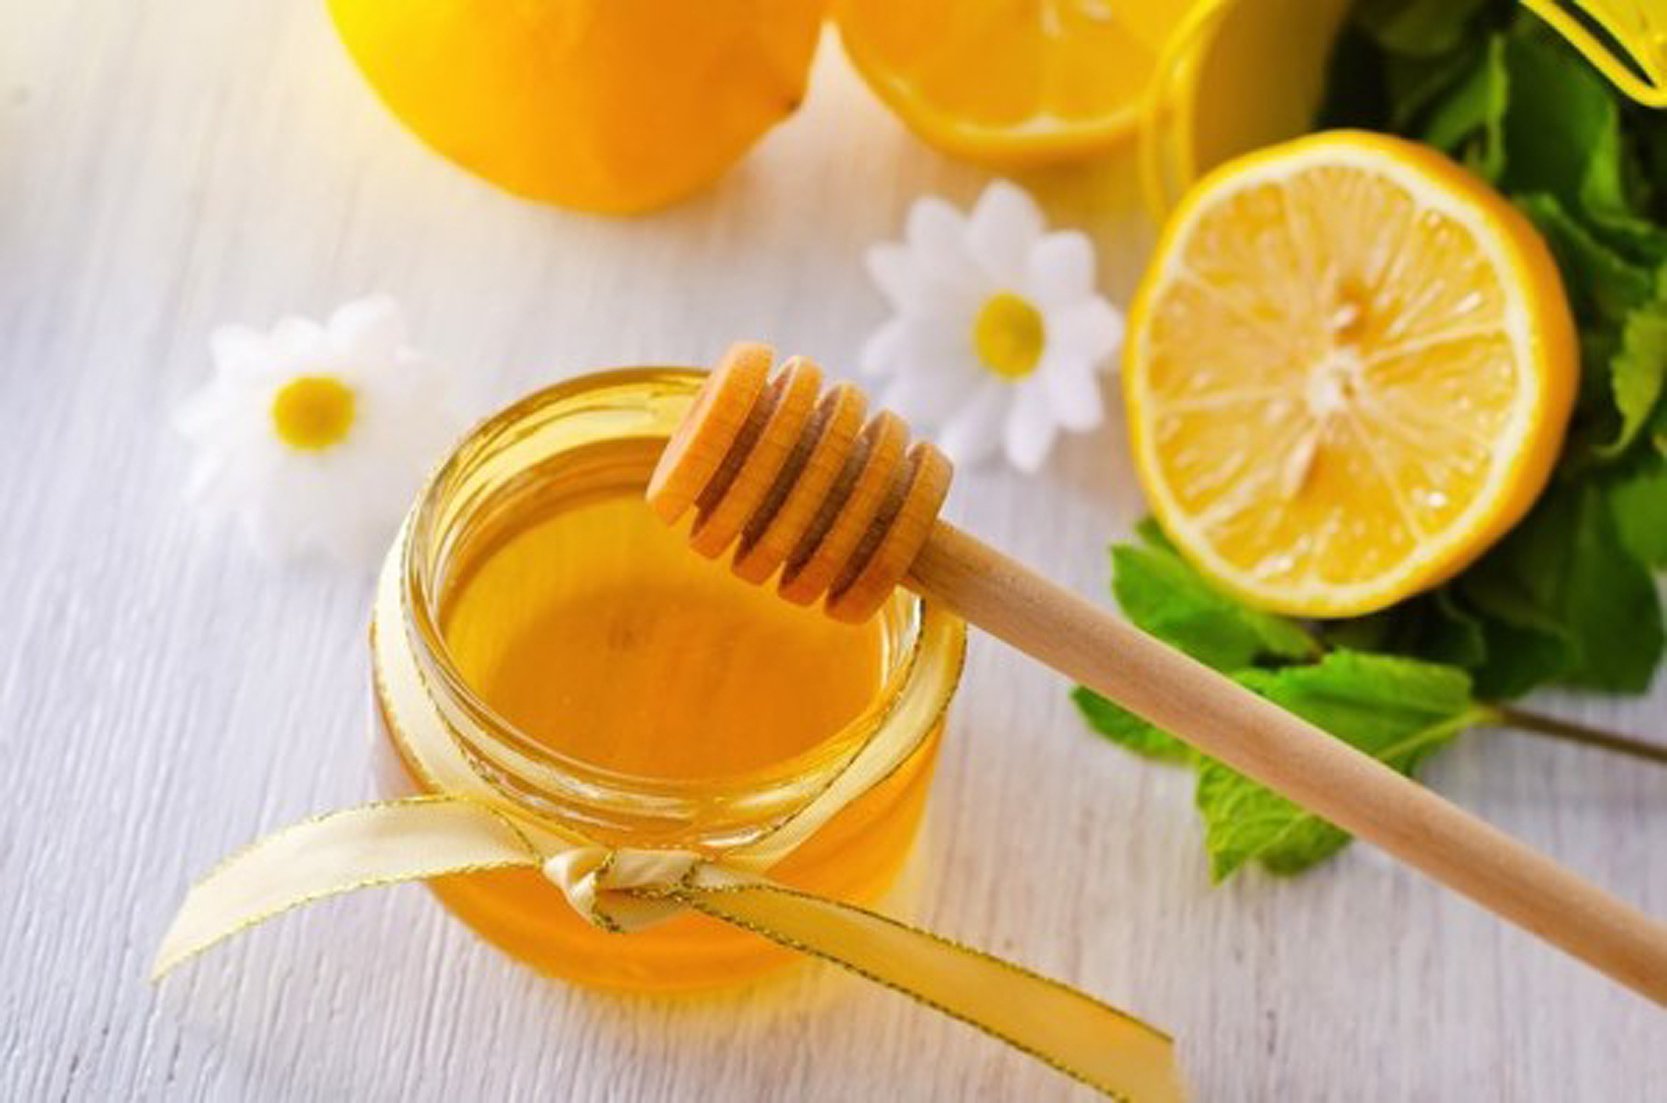 Honey contains many nutrients that help replenish energy quickly 